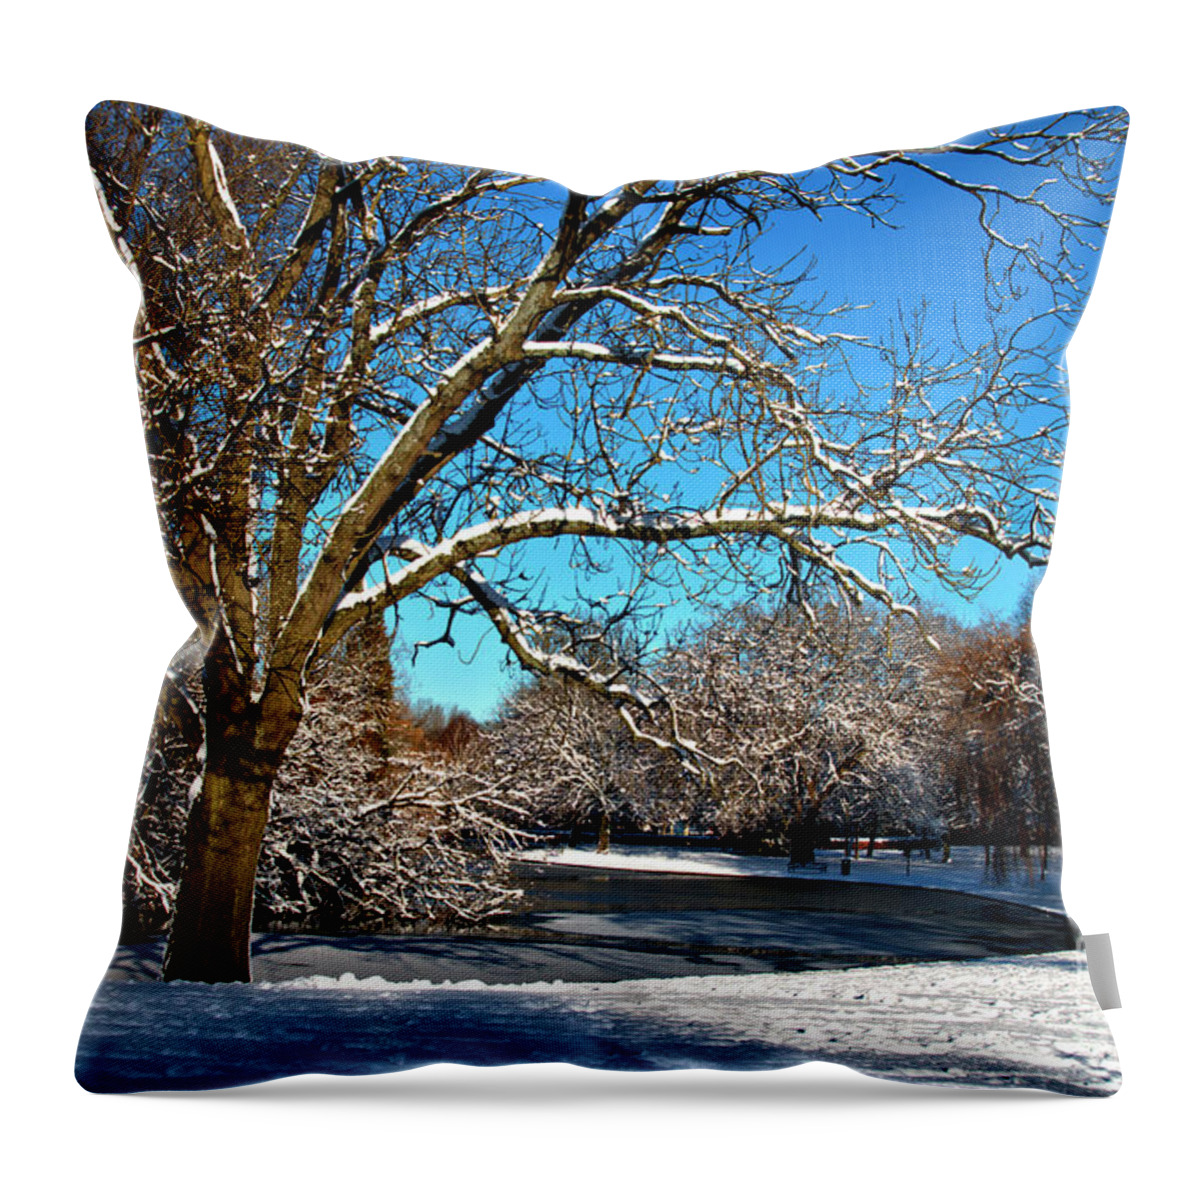 Landscape Throw Pillow featuring the photograph Snowy Pond by Baggieoldboy